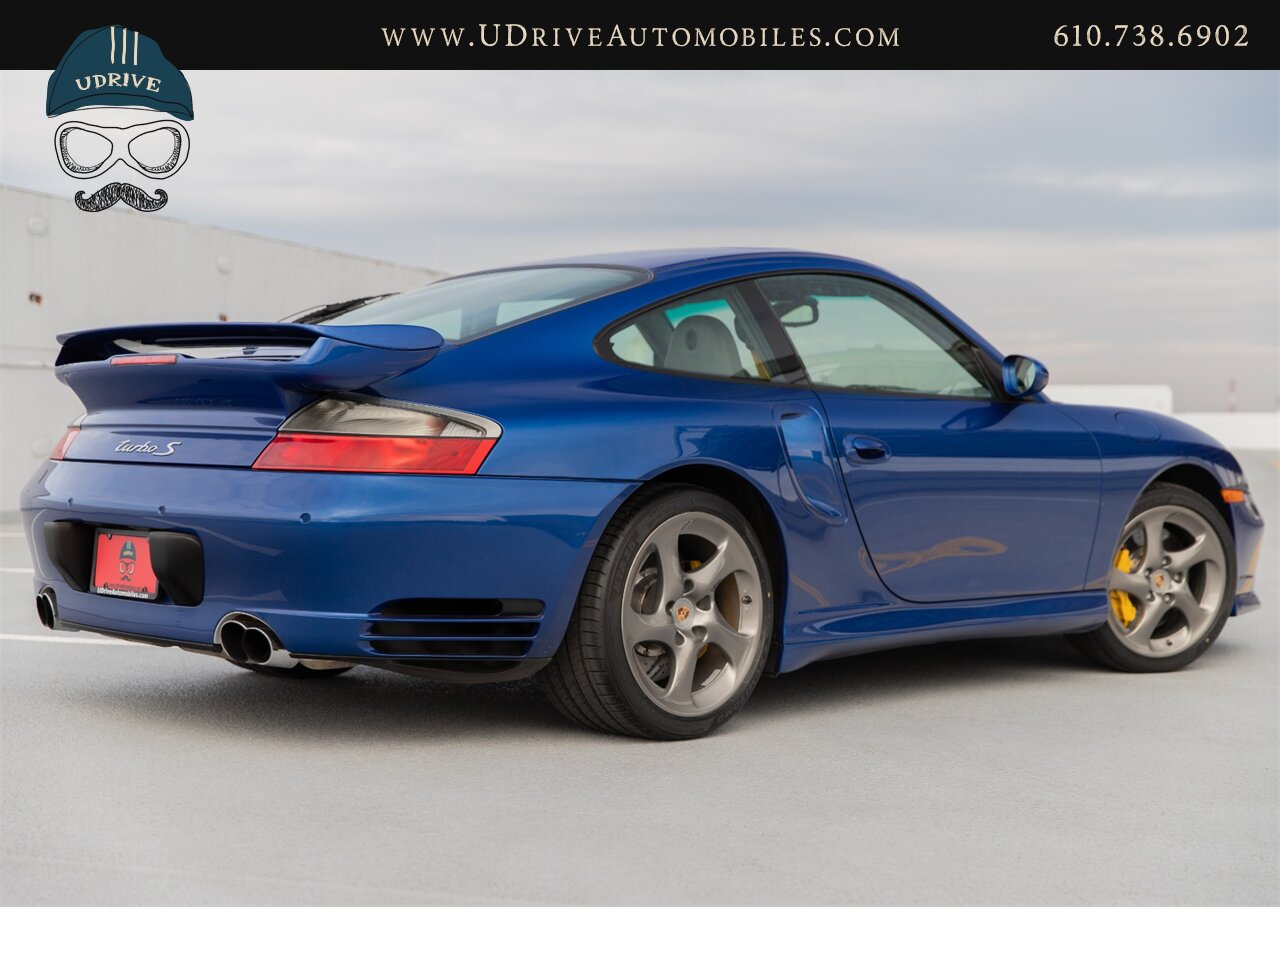 2005 Porsche 911 Turbo S Factory Aerokit Extremely Rare Cobalt Blue  Yellow Deviating Stitching 1 of a Kind Spec $160k MSRP - Photo 3 - West Chester, PA 19382